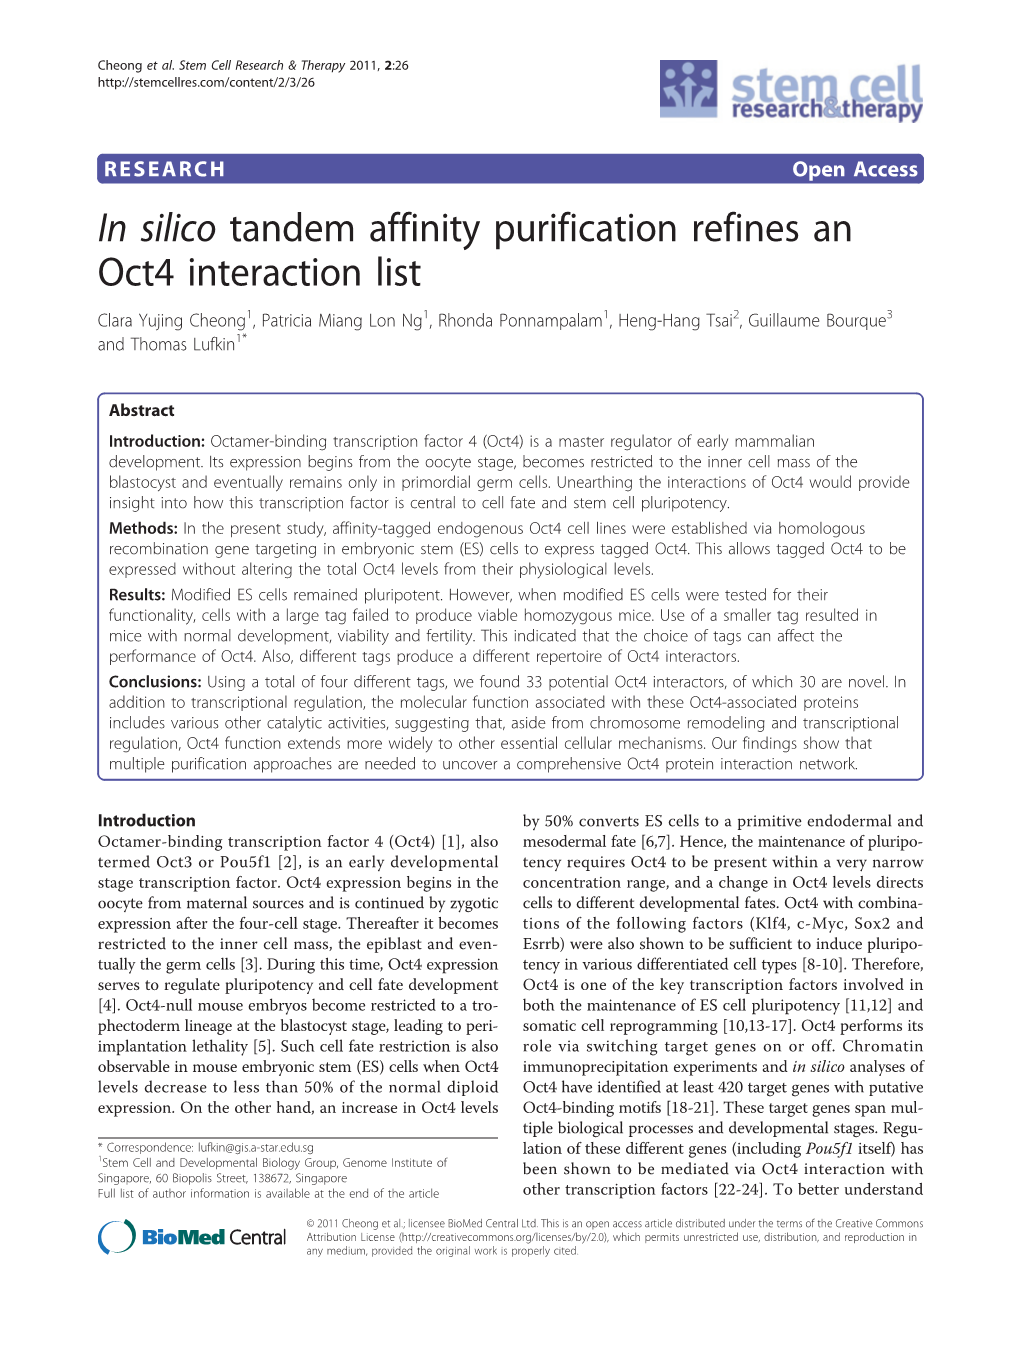 In Silico Tandem Affinity Purification Refines an Oct4 Interaction List